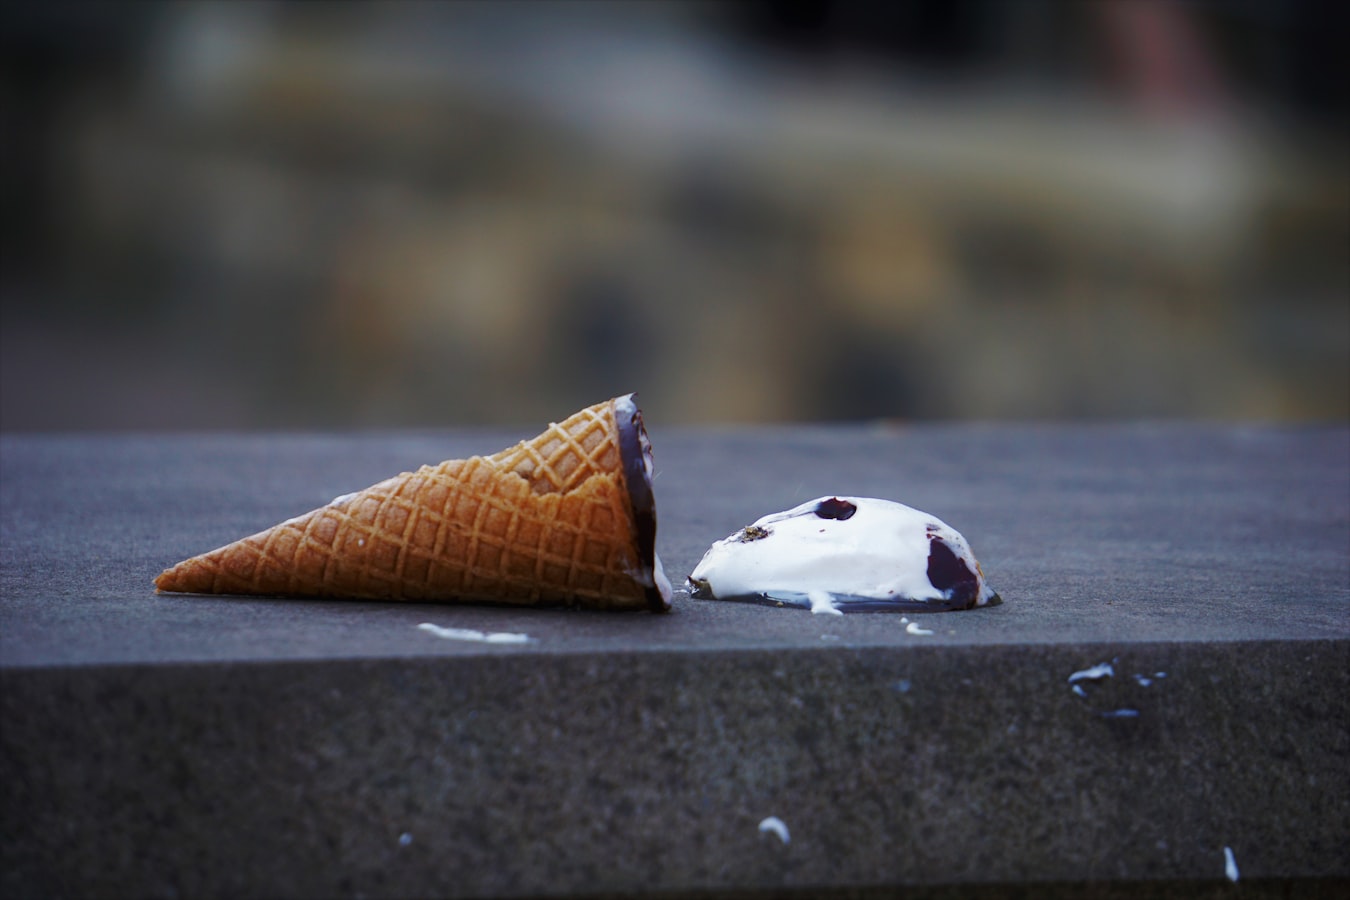 Ice cream that's fallen out of its cone